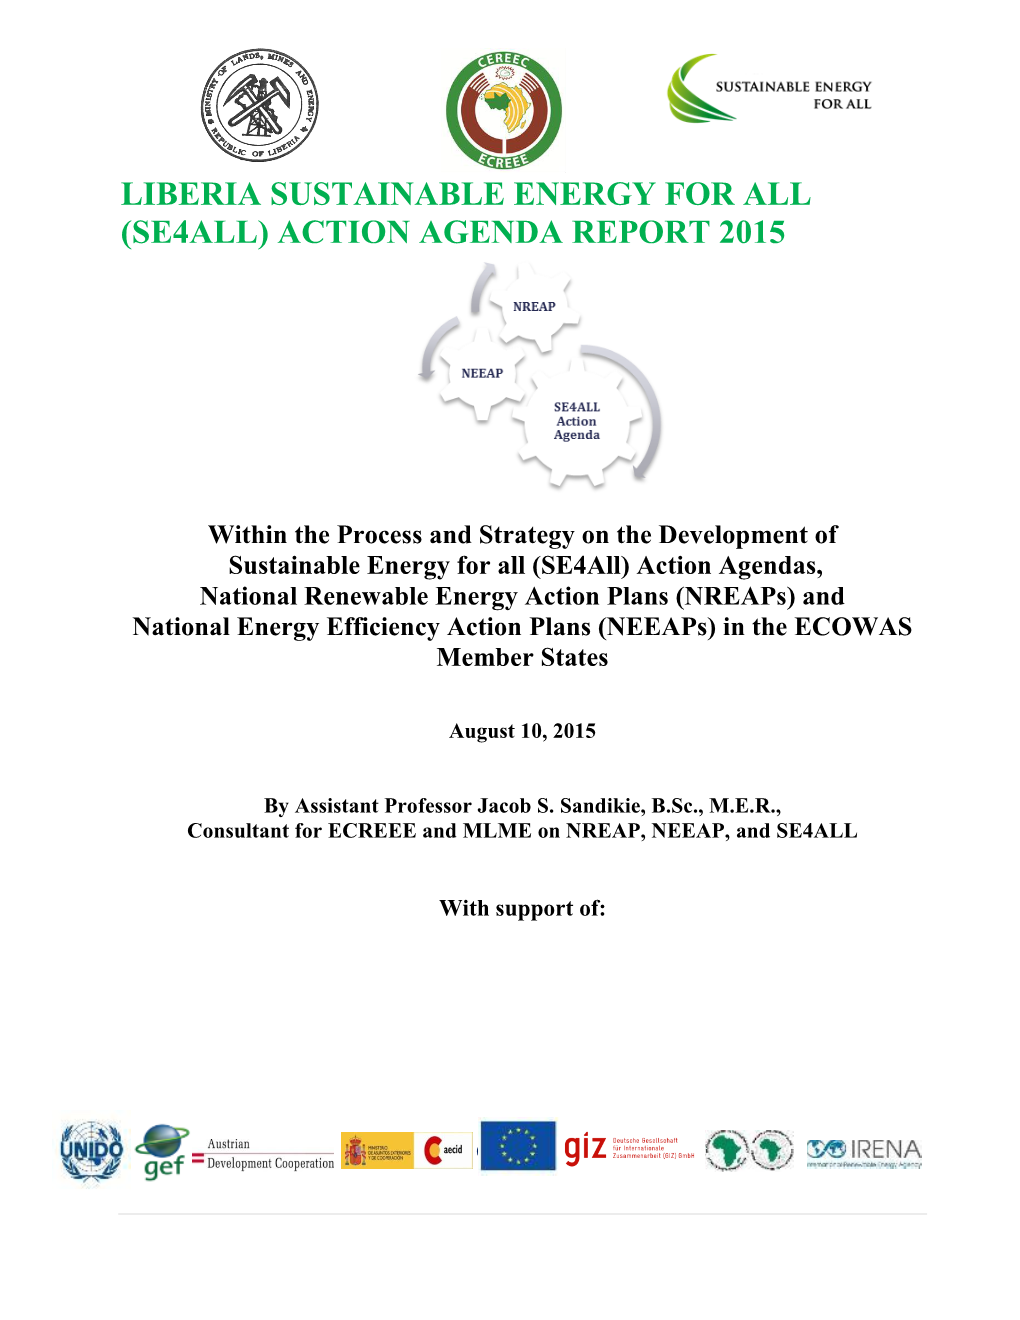 Liberia Sustainable Energy for All (Se4all) Action Agenda Report 2015